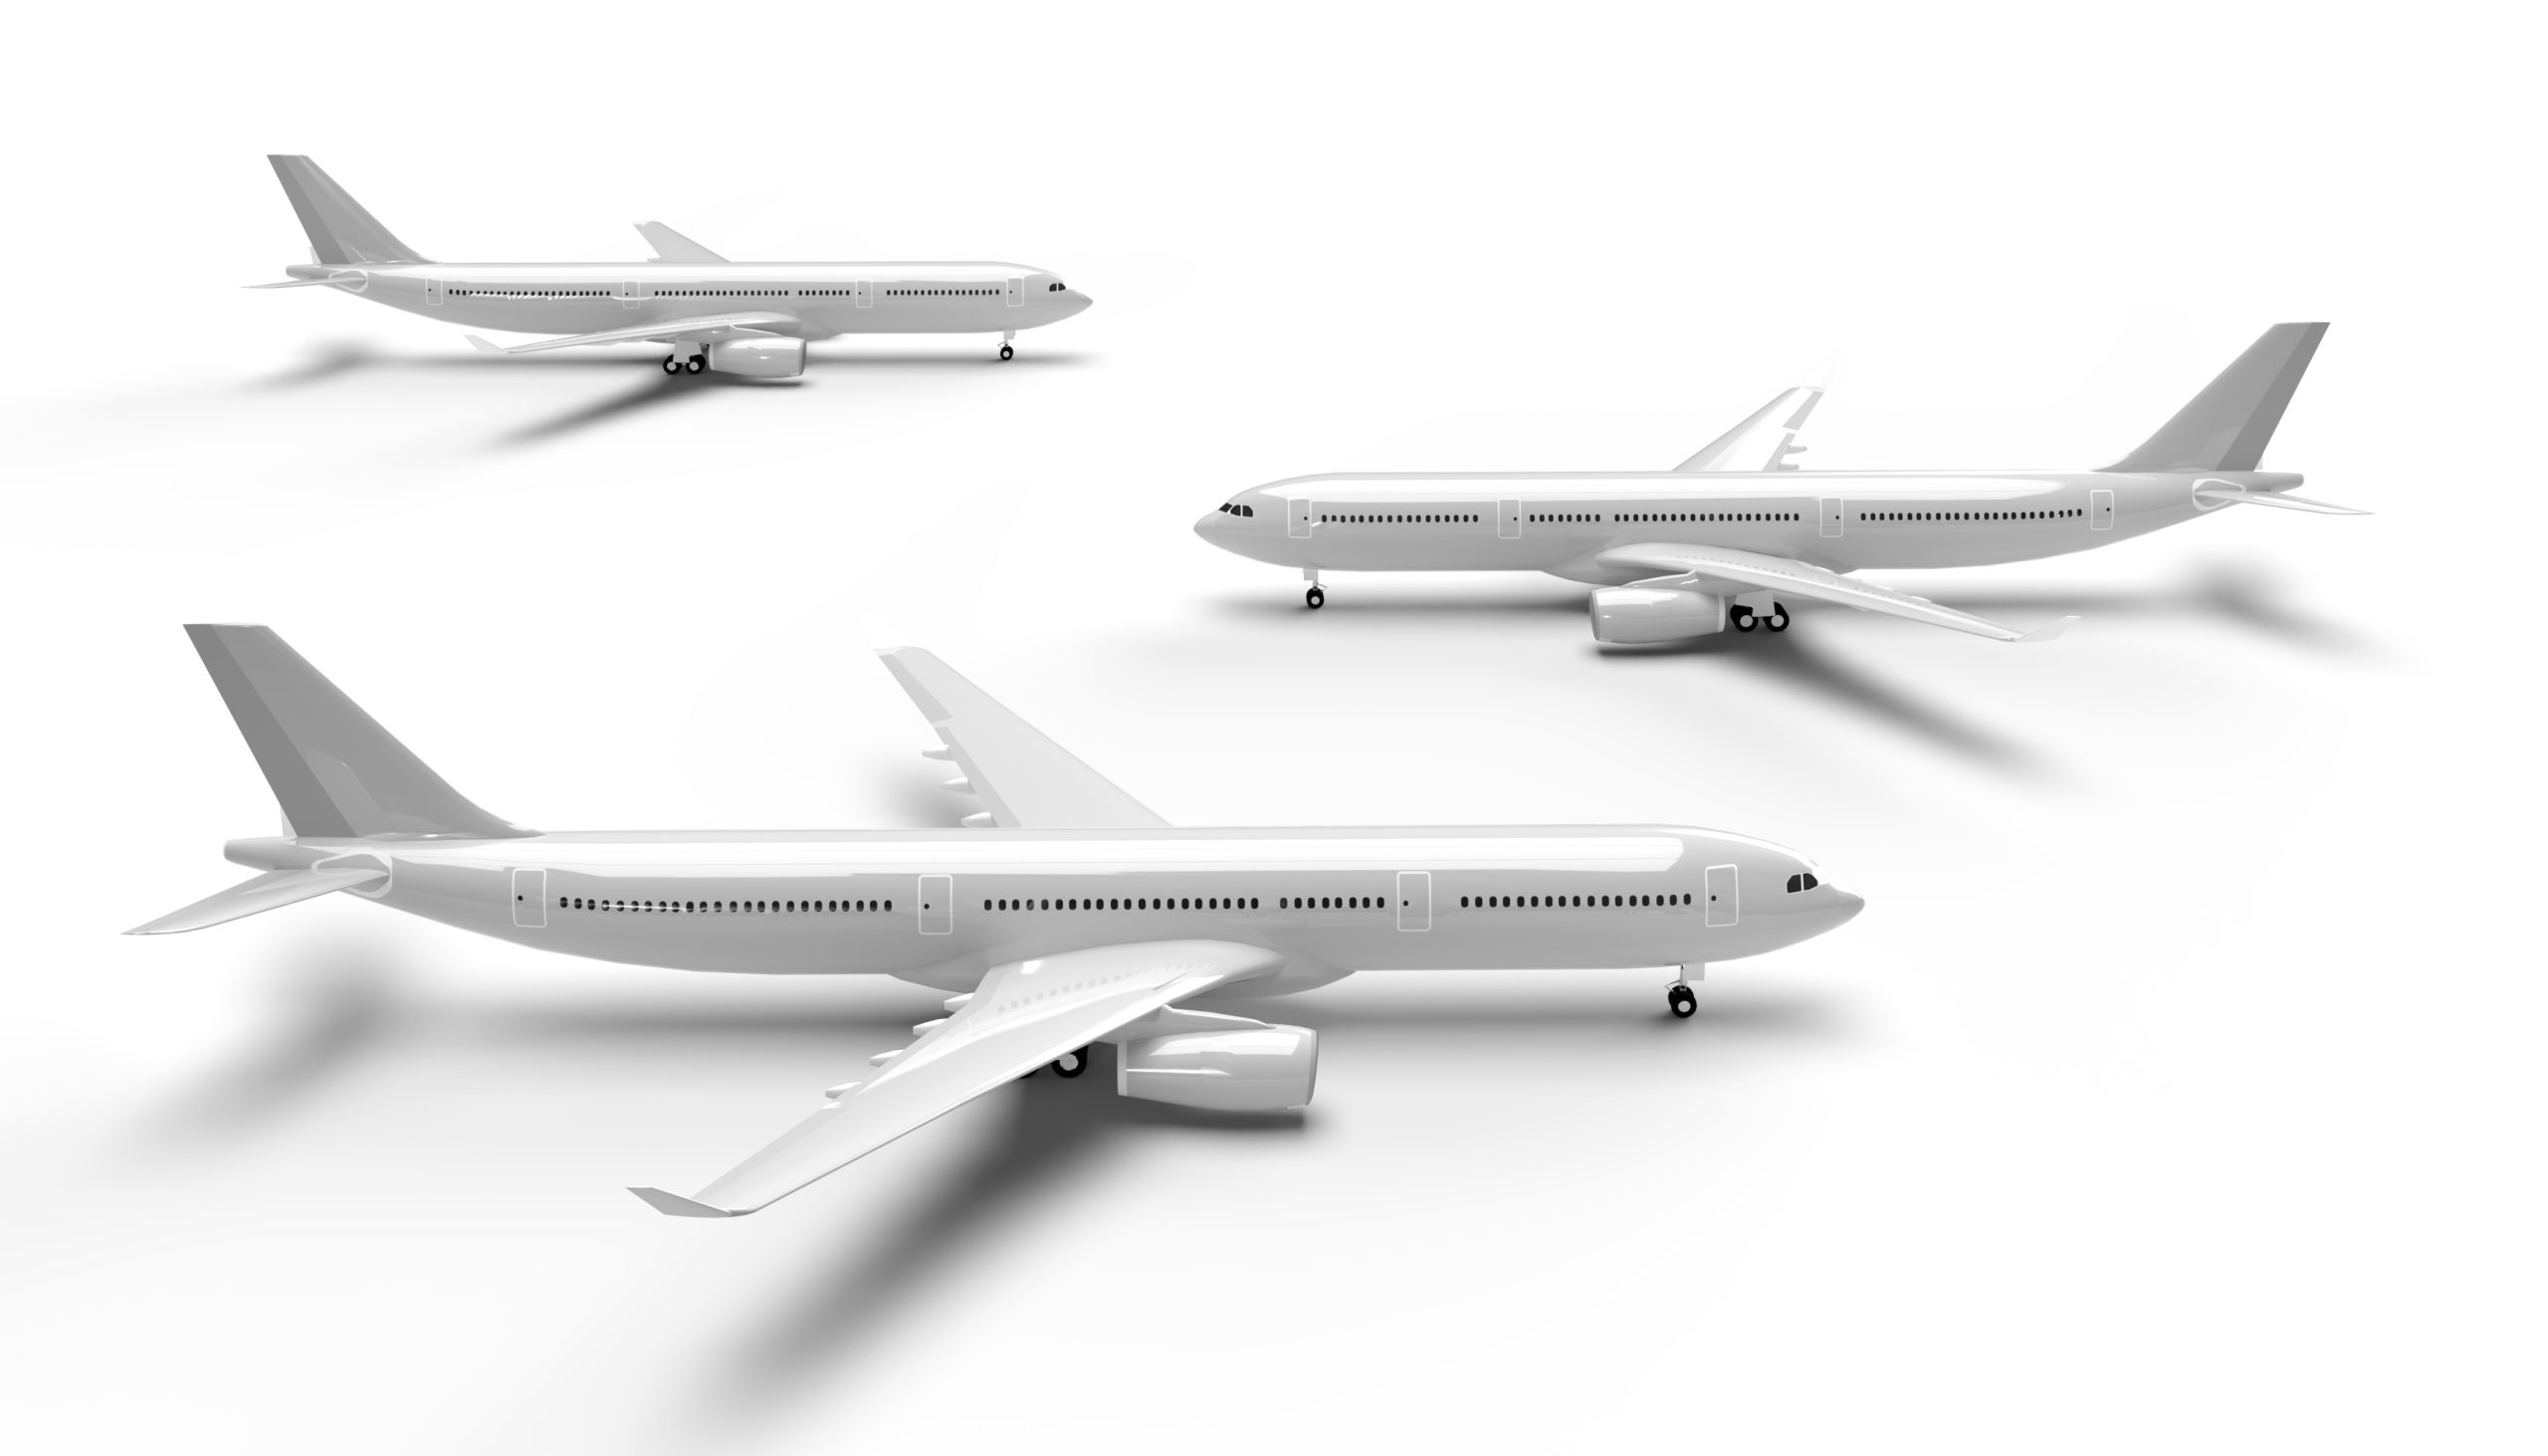 A comparison of three commercial aircraft of varying sizes: a small regional jet, a medium-sized single-aisle jet, and a large wide-body jet.